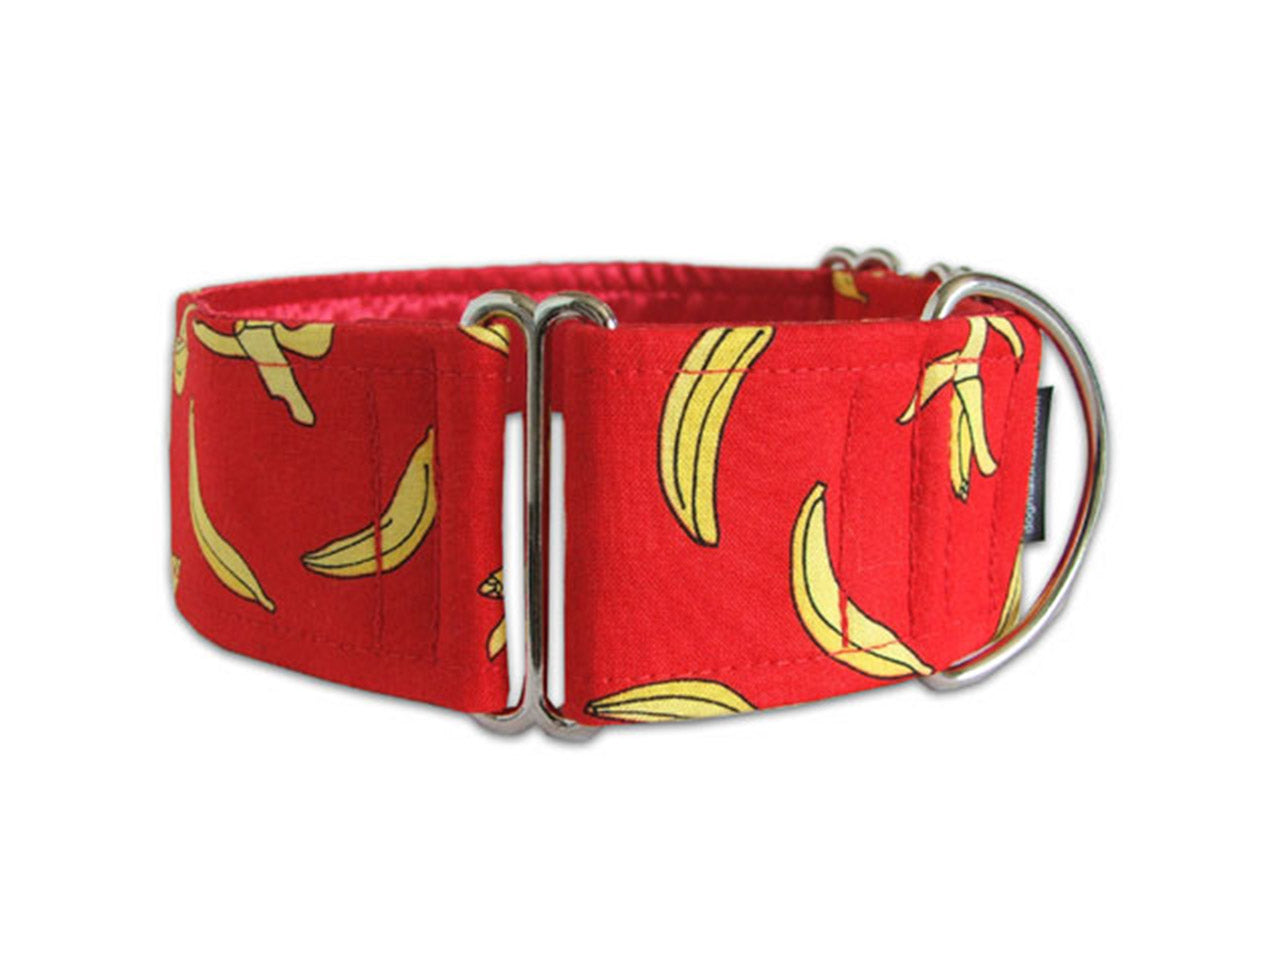 Your pup will go bananas for this cheerful red collar, great for any pooch with a playful side!